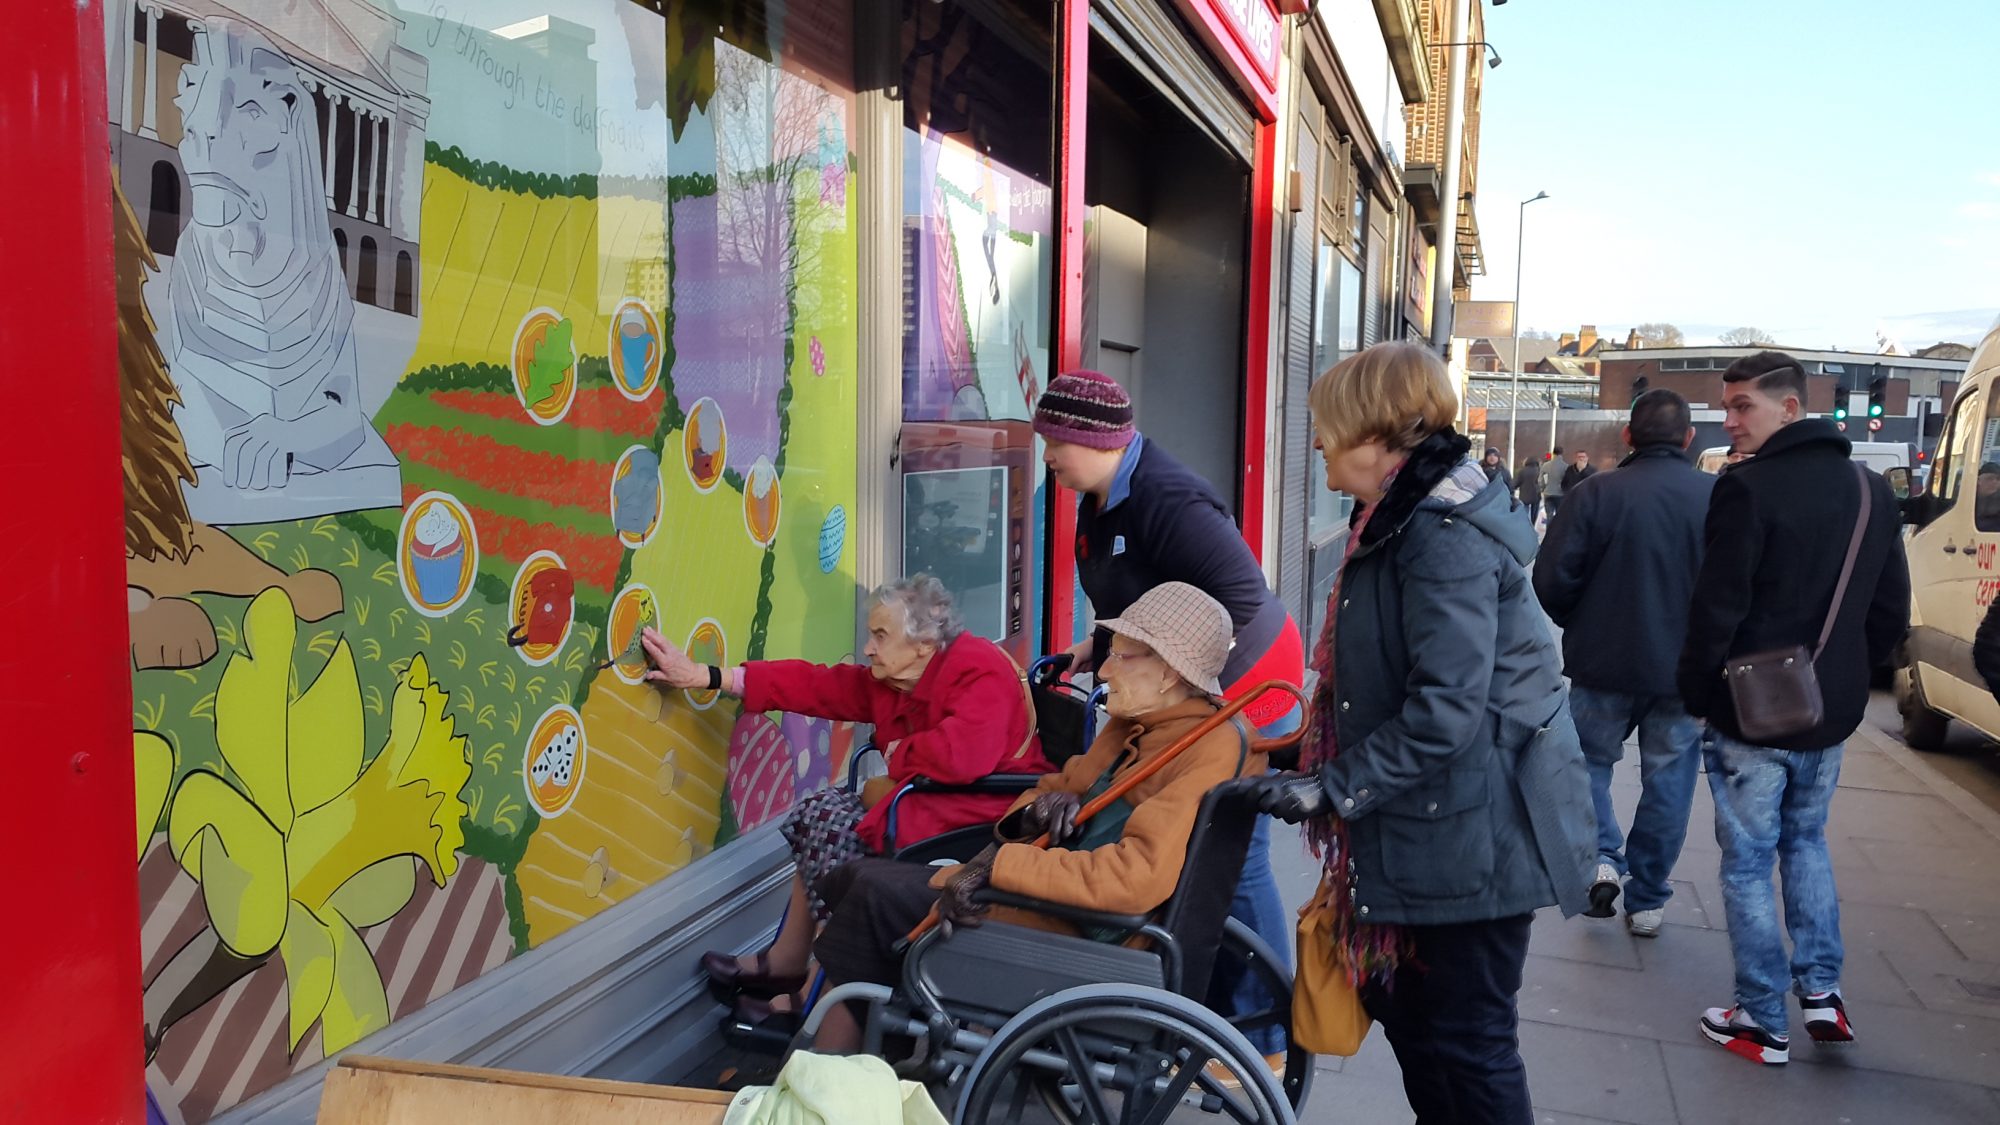 Older people interact with art installation